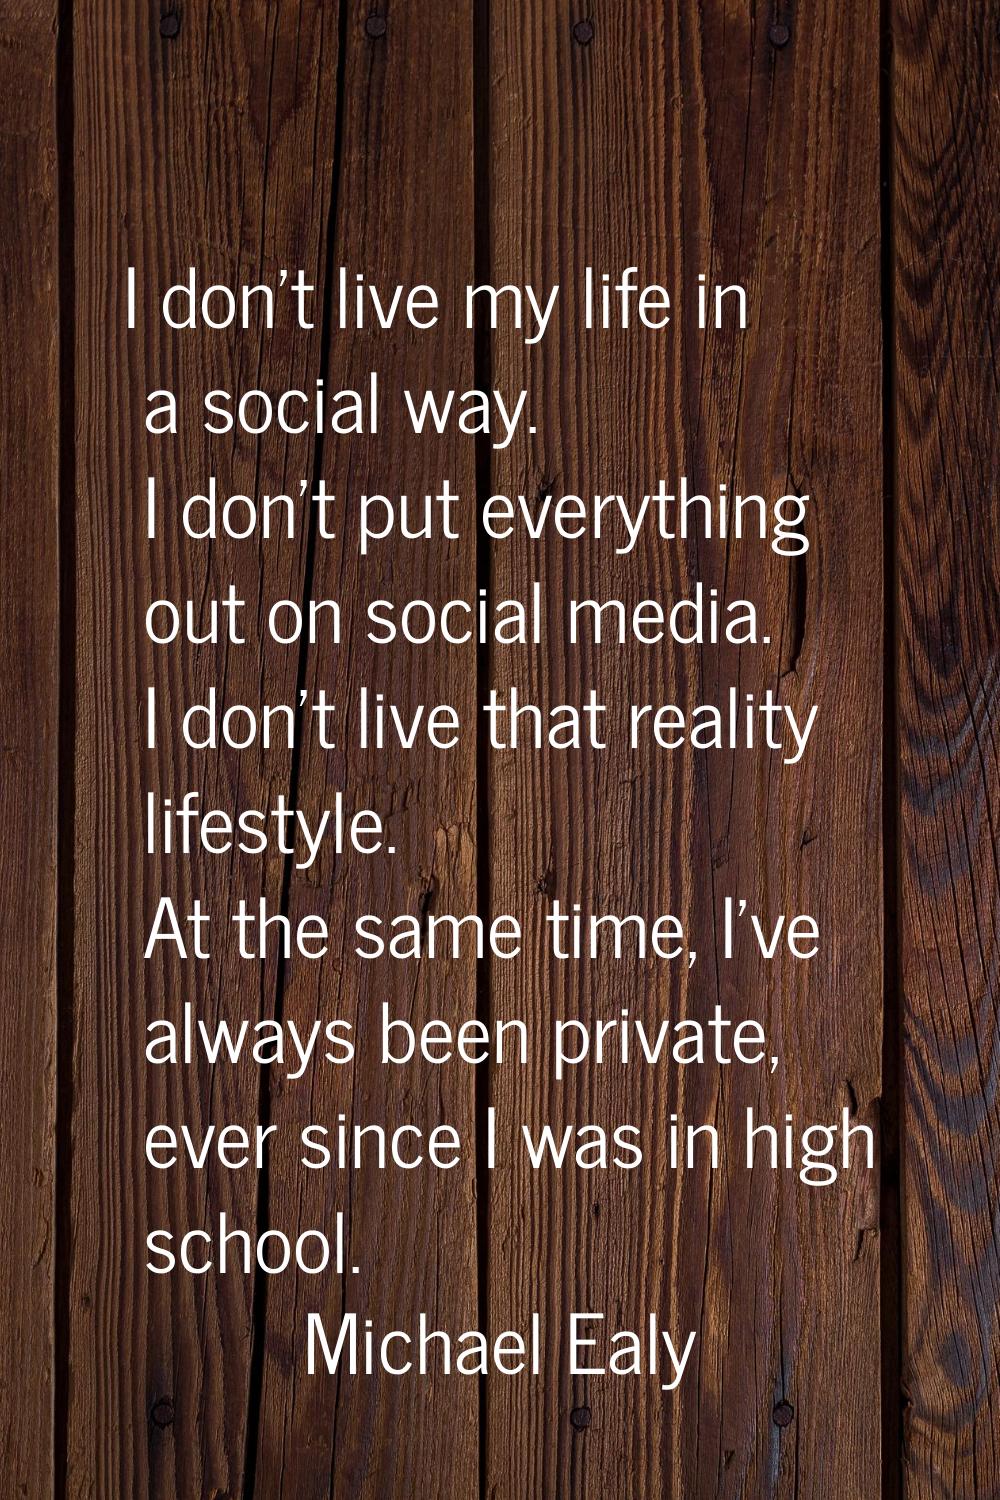 I don't live my life in a social way. I don't put everything out on social media. I don't live that